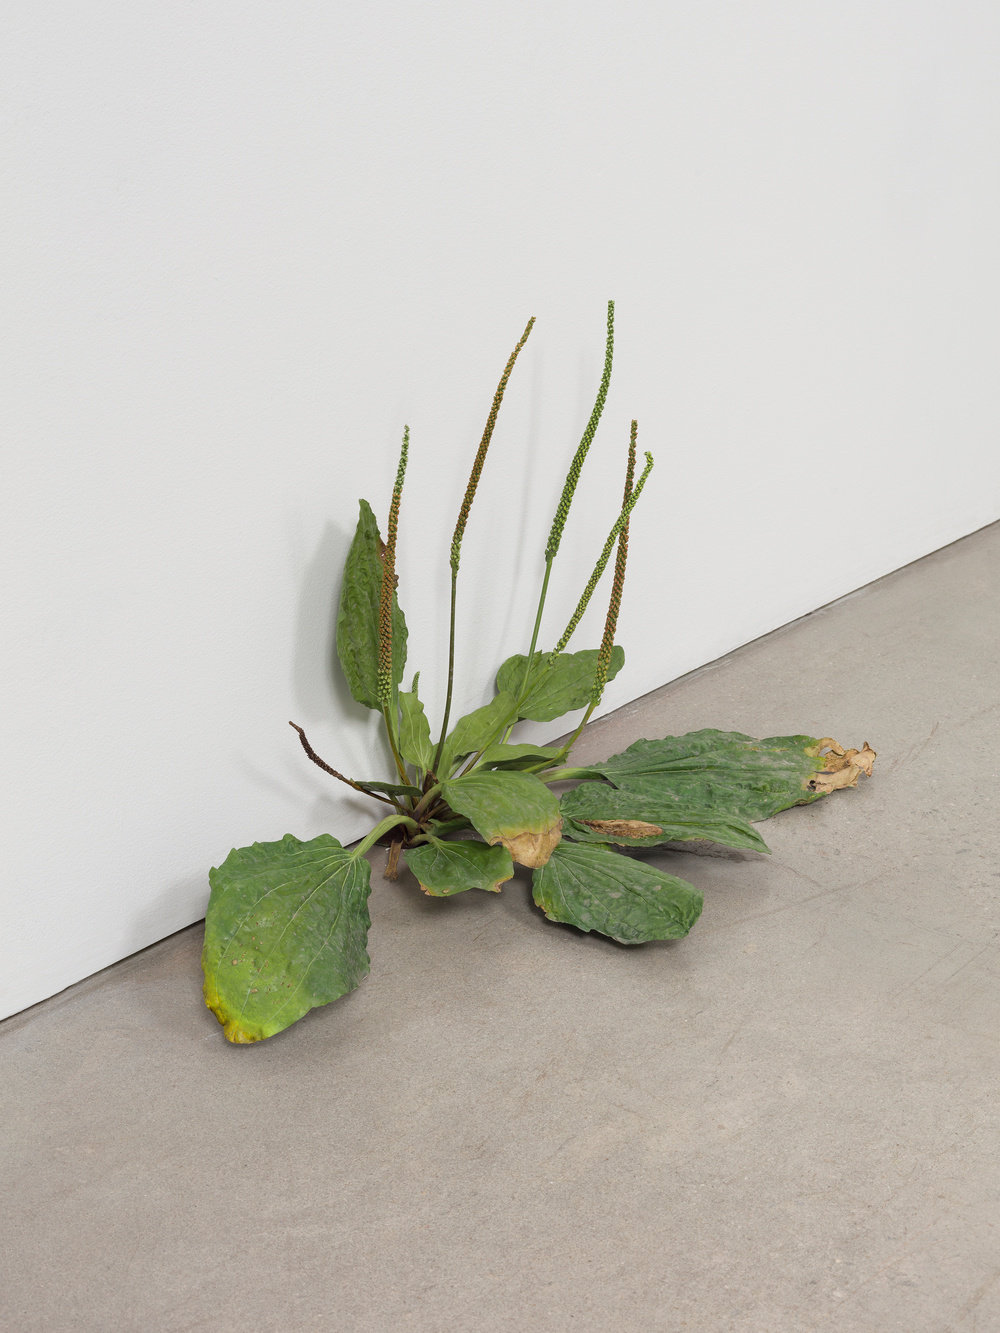 Matelli, weed 490 (view 1), 2019, painted bronze, 14 1 2 x 22 x 8 in., 36.8 x 55.9 x 20.3 cm, cnon 61.999 plh